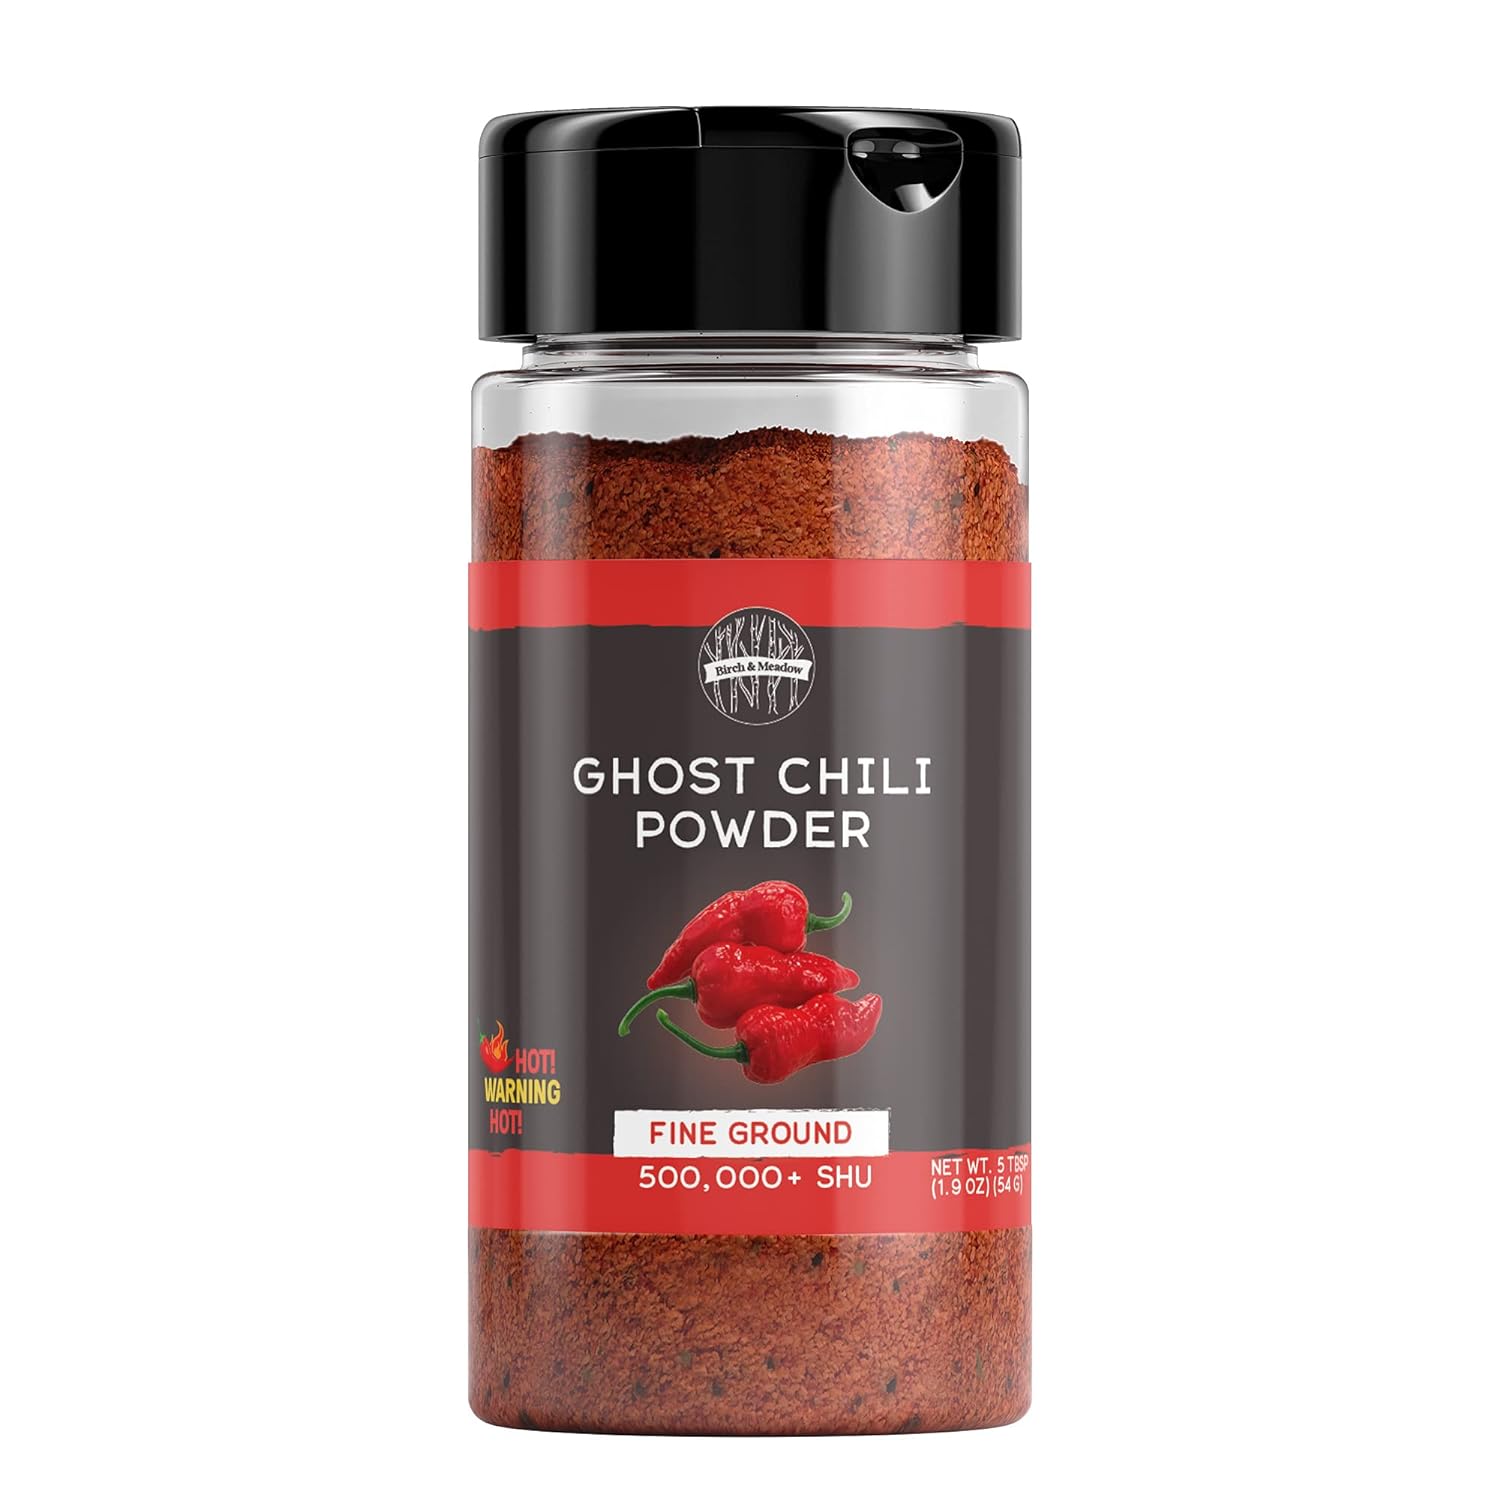 Birch & Meadow 5 Tbsp of Ground Ghost Chile Peppers, 500,000+ SHU, Sauces, Salsa